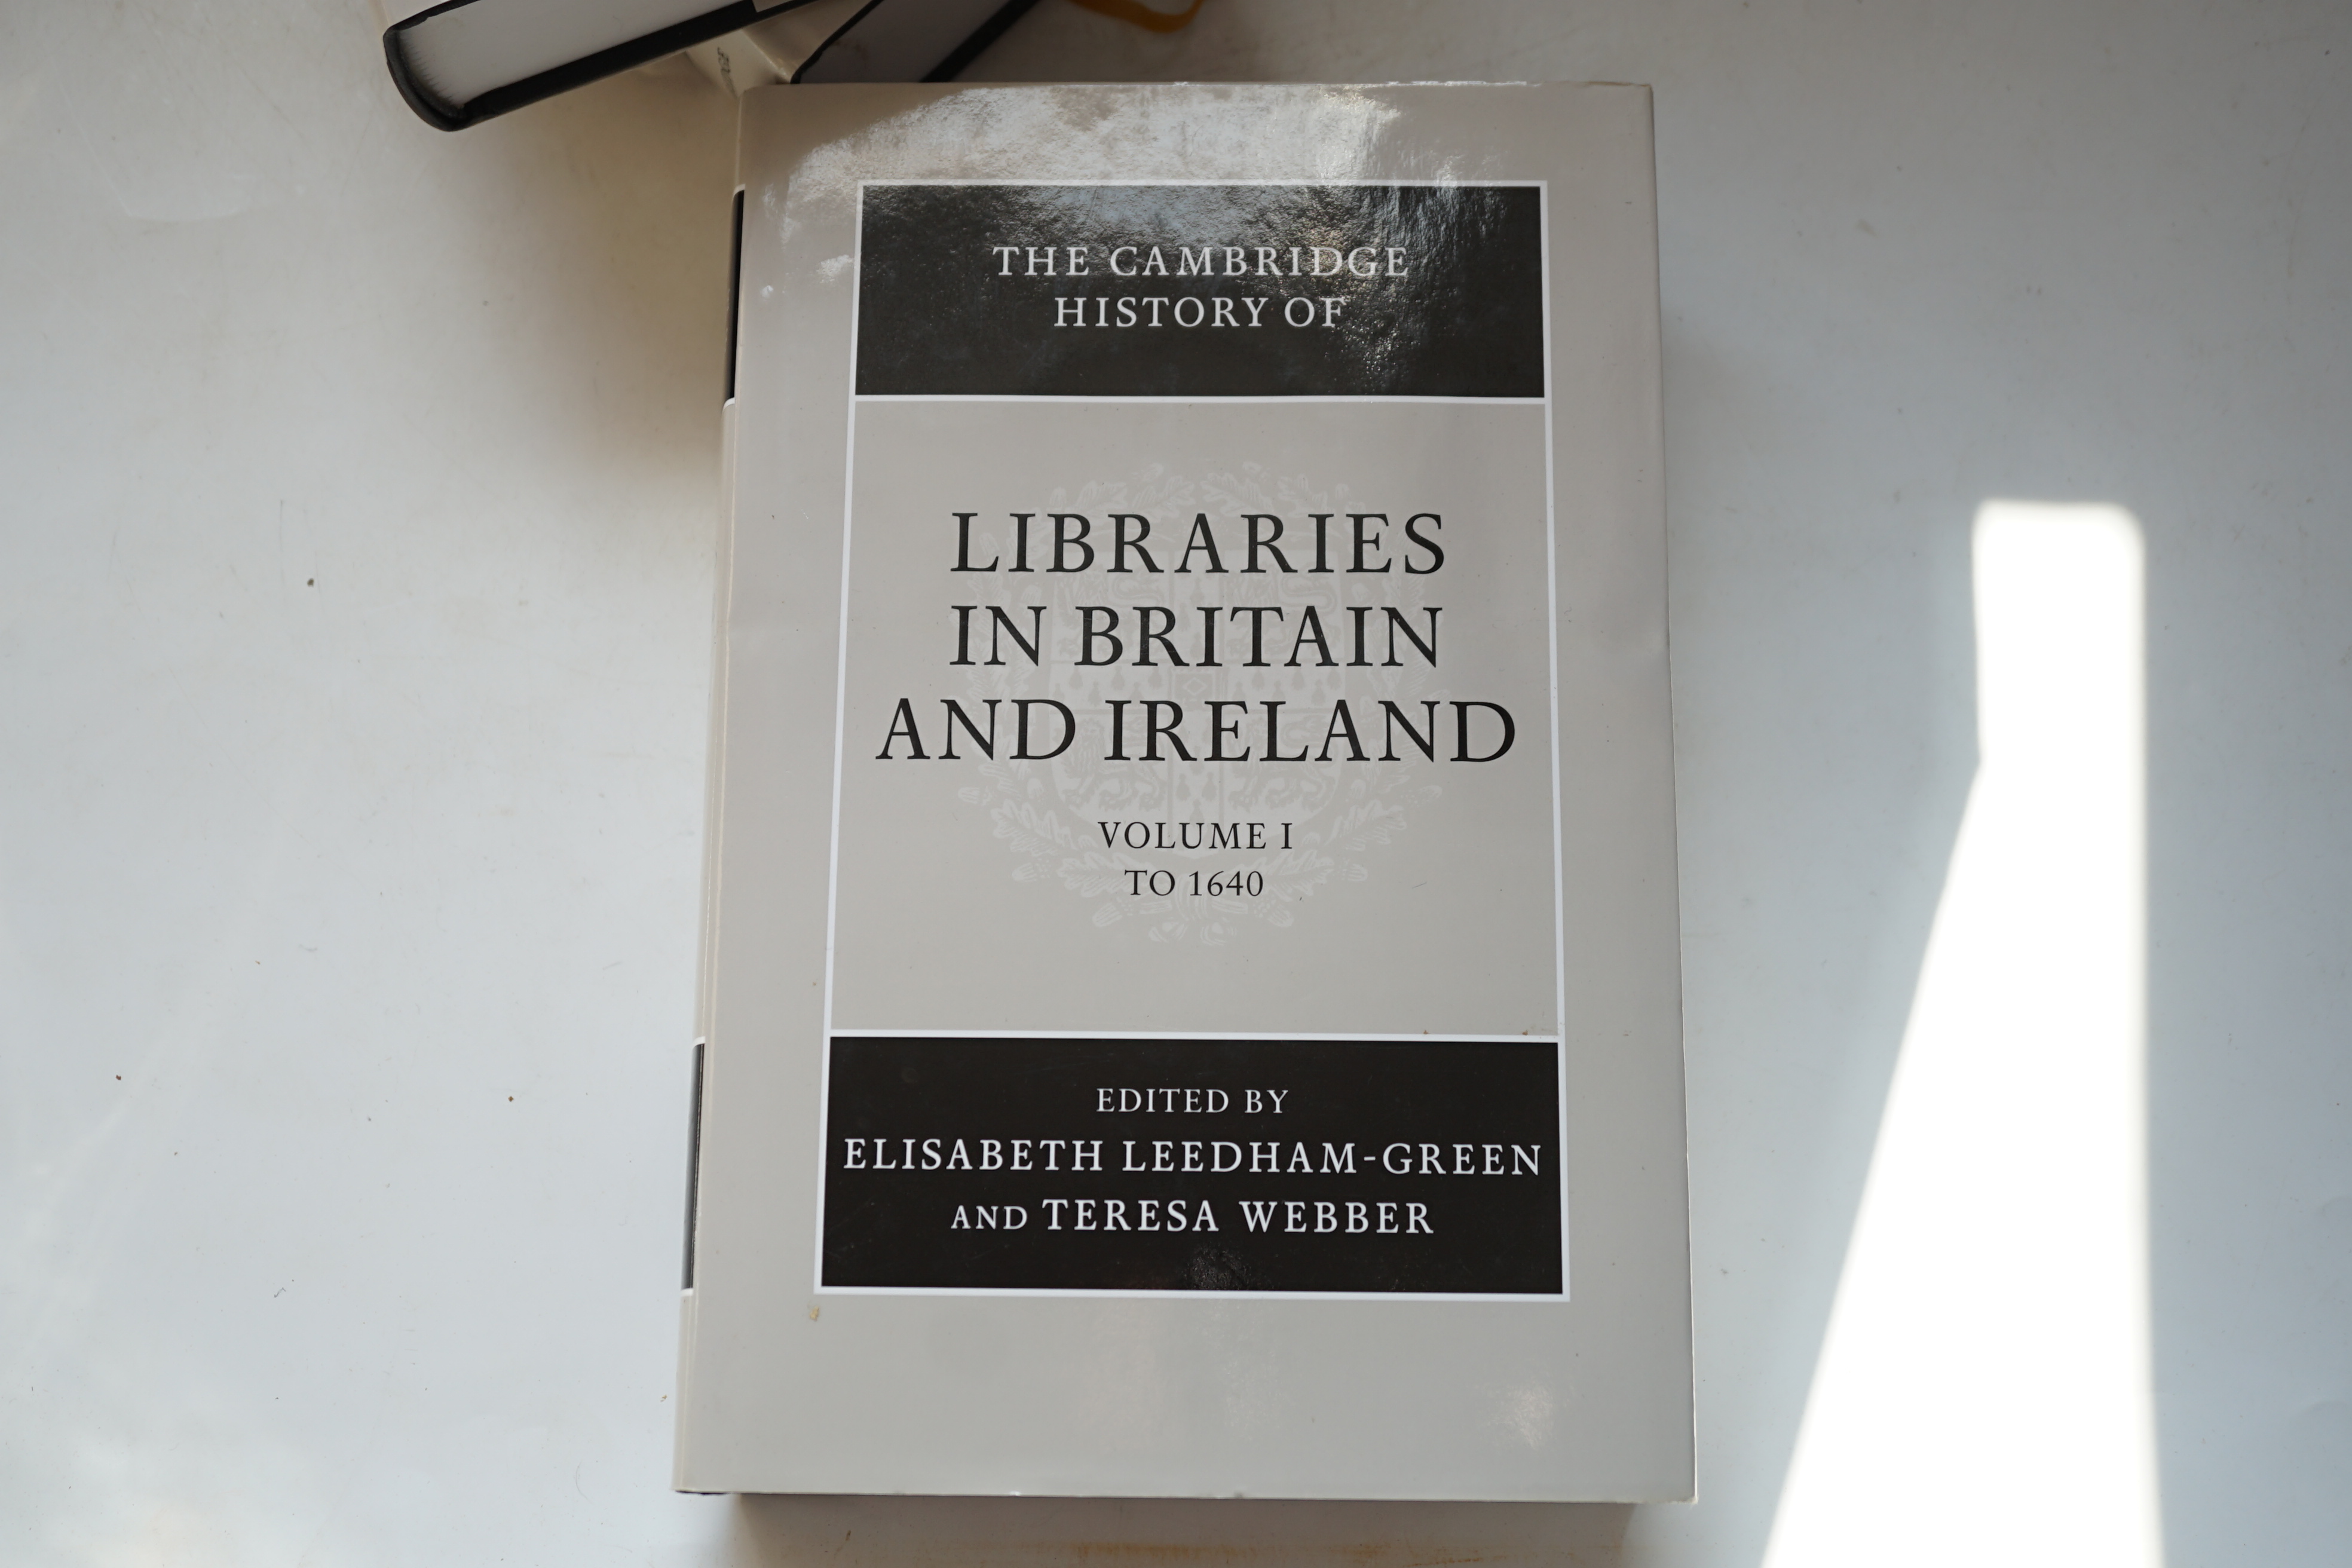 Leedham-Green, Elisabeth & Webber, Teresa, and others (editors) - The Cambridge History of Libraries in Britain and Ireland, 3 vols., 8vo, original cloth in d/j’s, nick to top right of d/j spine to vol. 3, Cambridge Univ